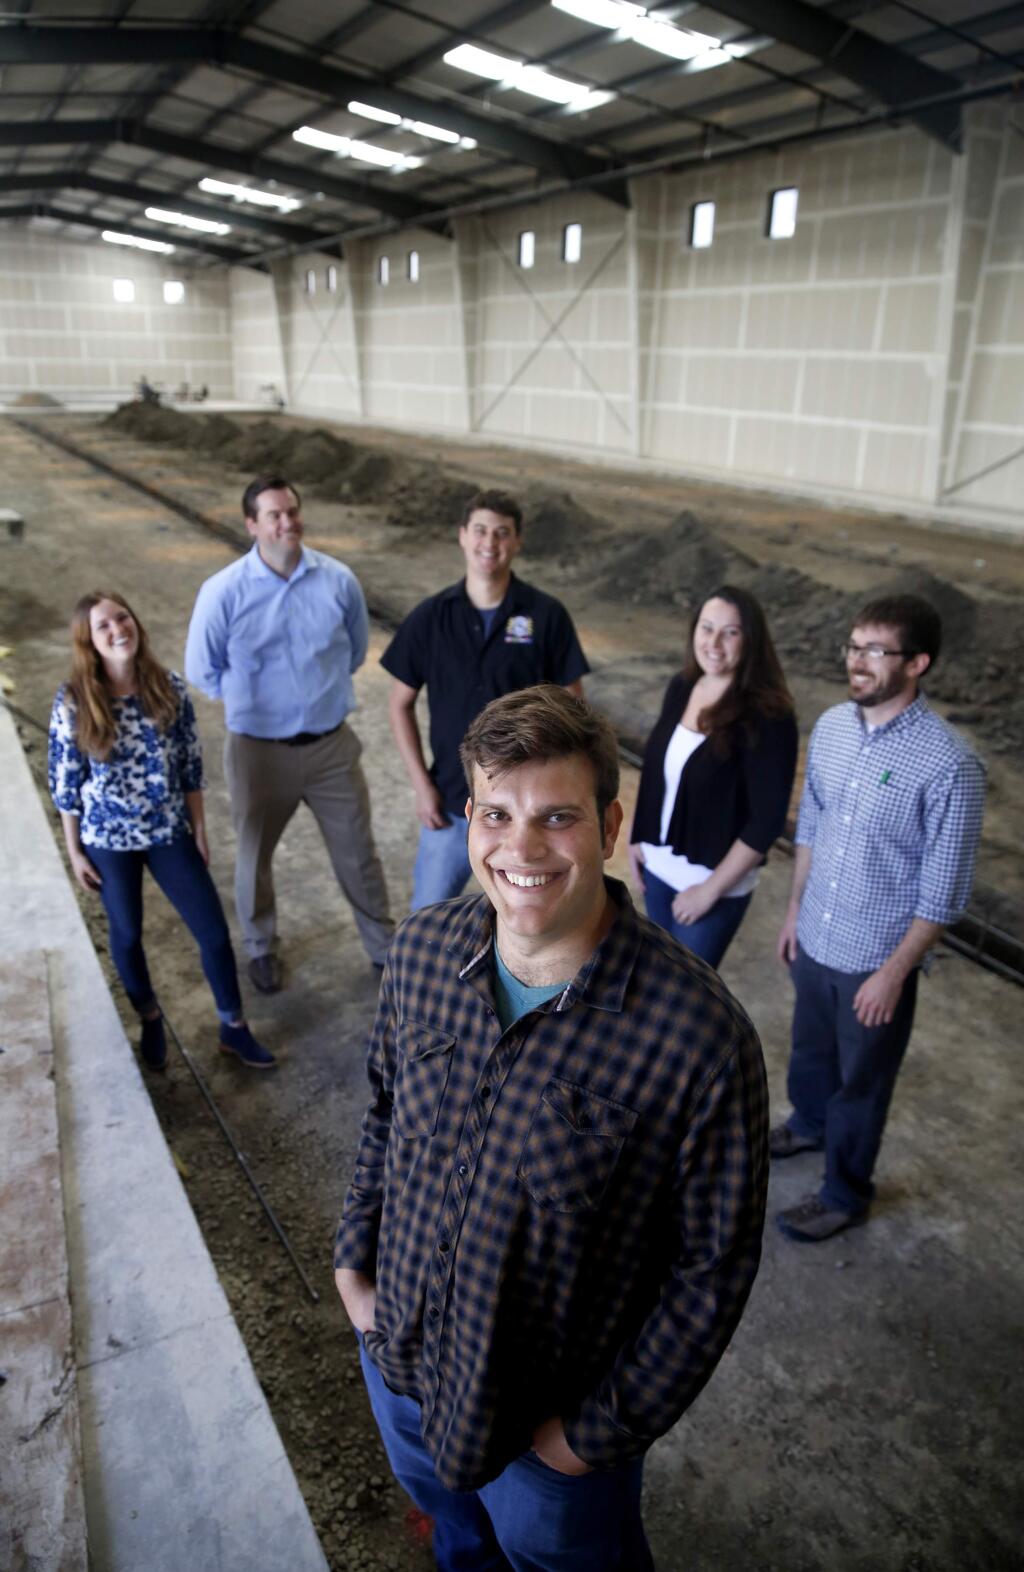 Christopher Jackson, owner of Seismic Brewing Co., with (from left) his wife Ariel, Tom McGinty, Vice President of Sales and Marketing, Andy Hooper, Brewmaster and Director of Operations, his wife Danica Hooper, Director of Accounting and Logistics, and General Manager Patrick Delves at the building which will house Seismic Brewing Co. Photo taken in Santa Rosa, on Thursday, May 26, 2016. (BETH SCHLANKER/ The Press Democrat)